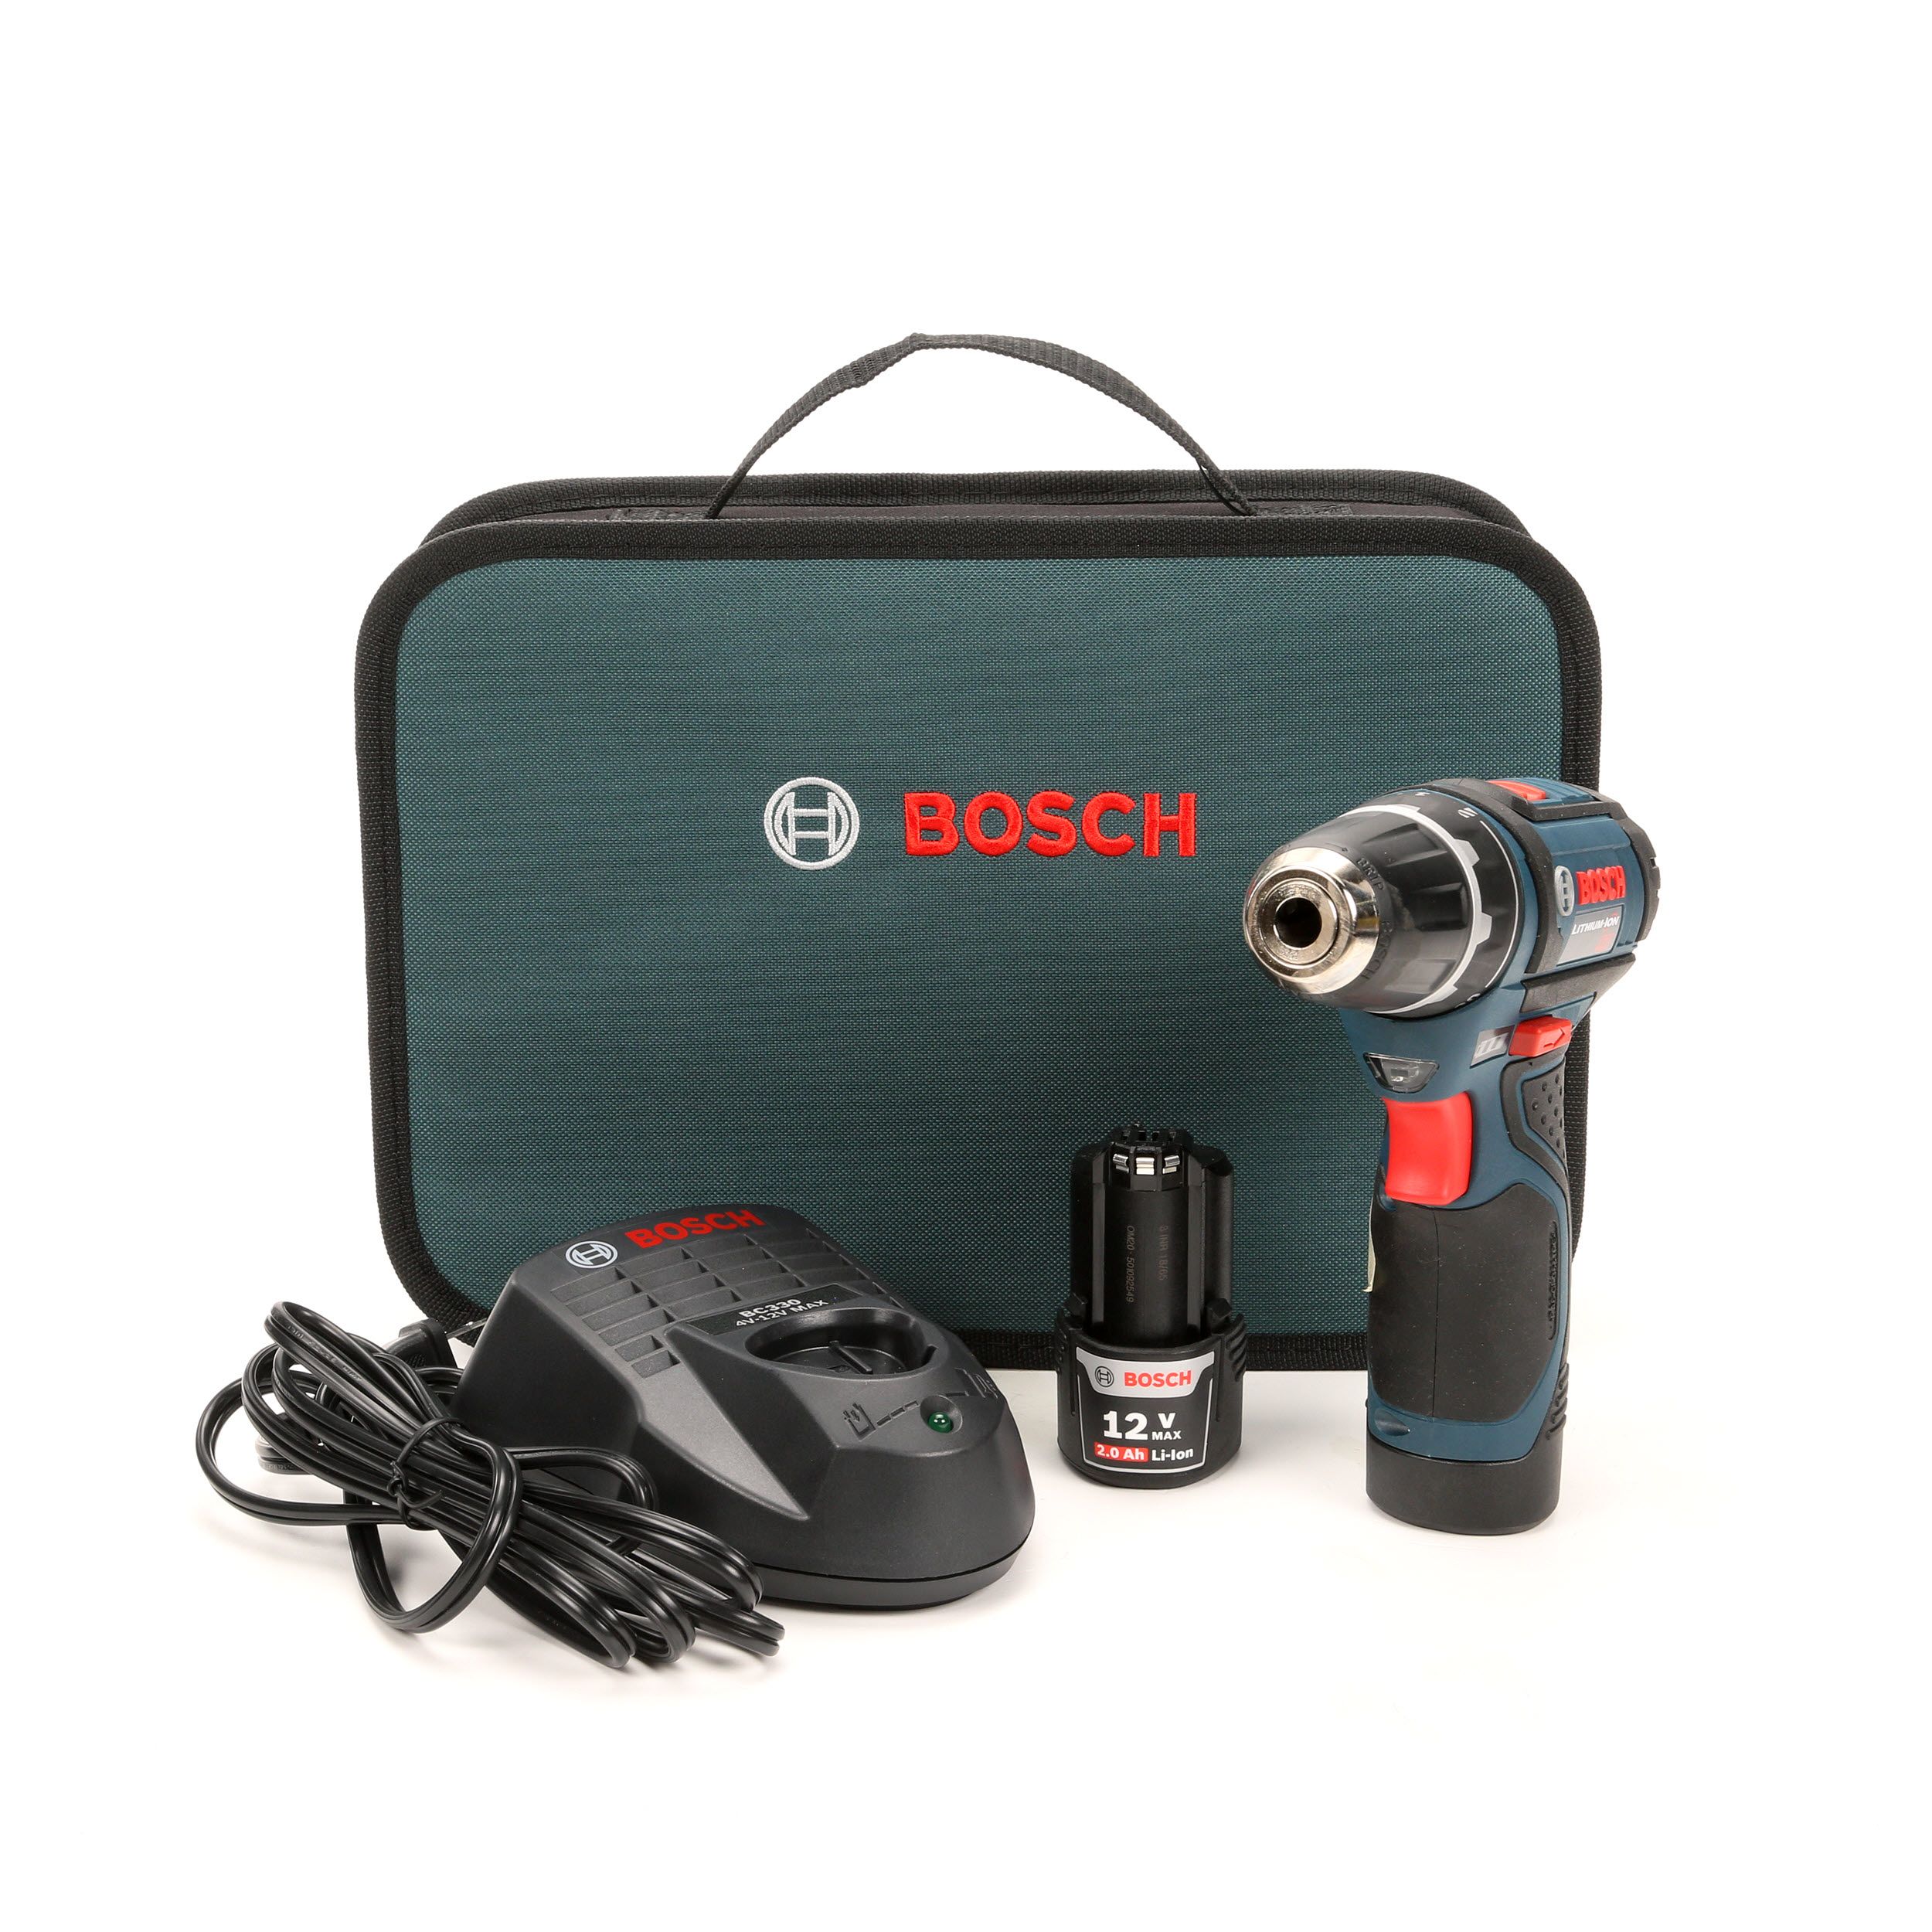 Bosch Tool Bag S Small  Size for 10.8V 12V Cordless Tool 